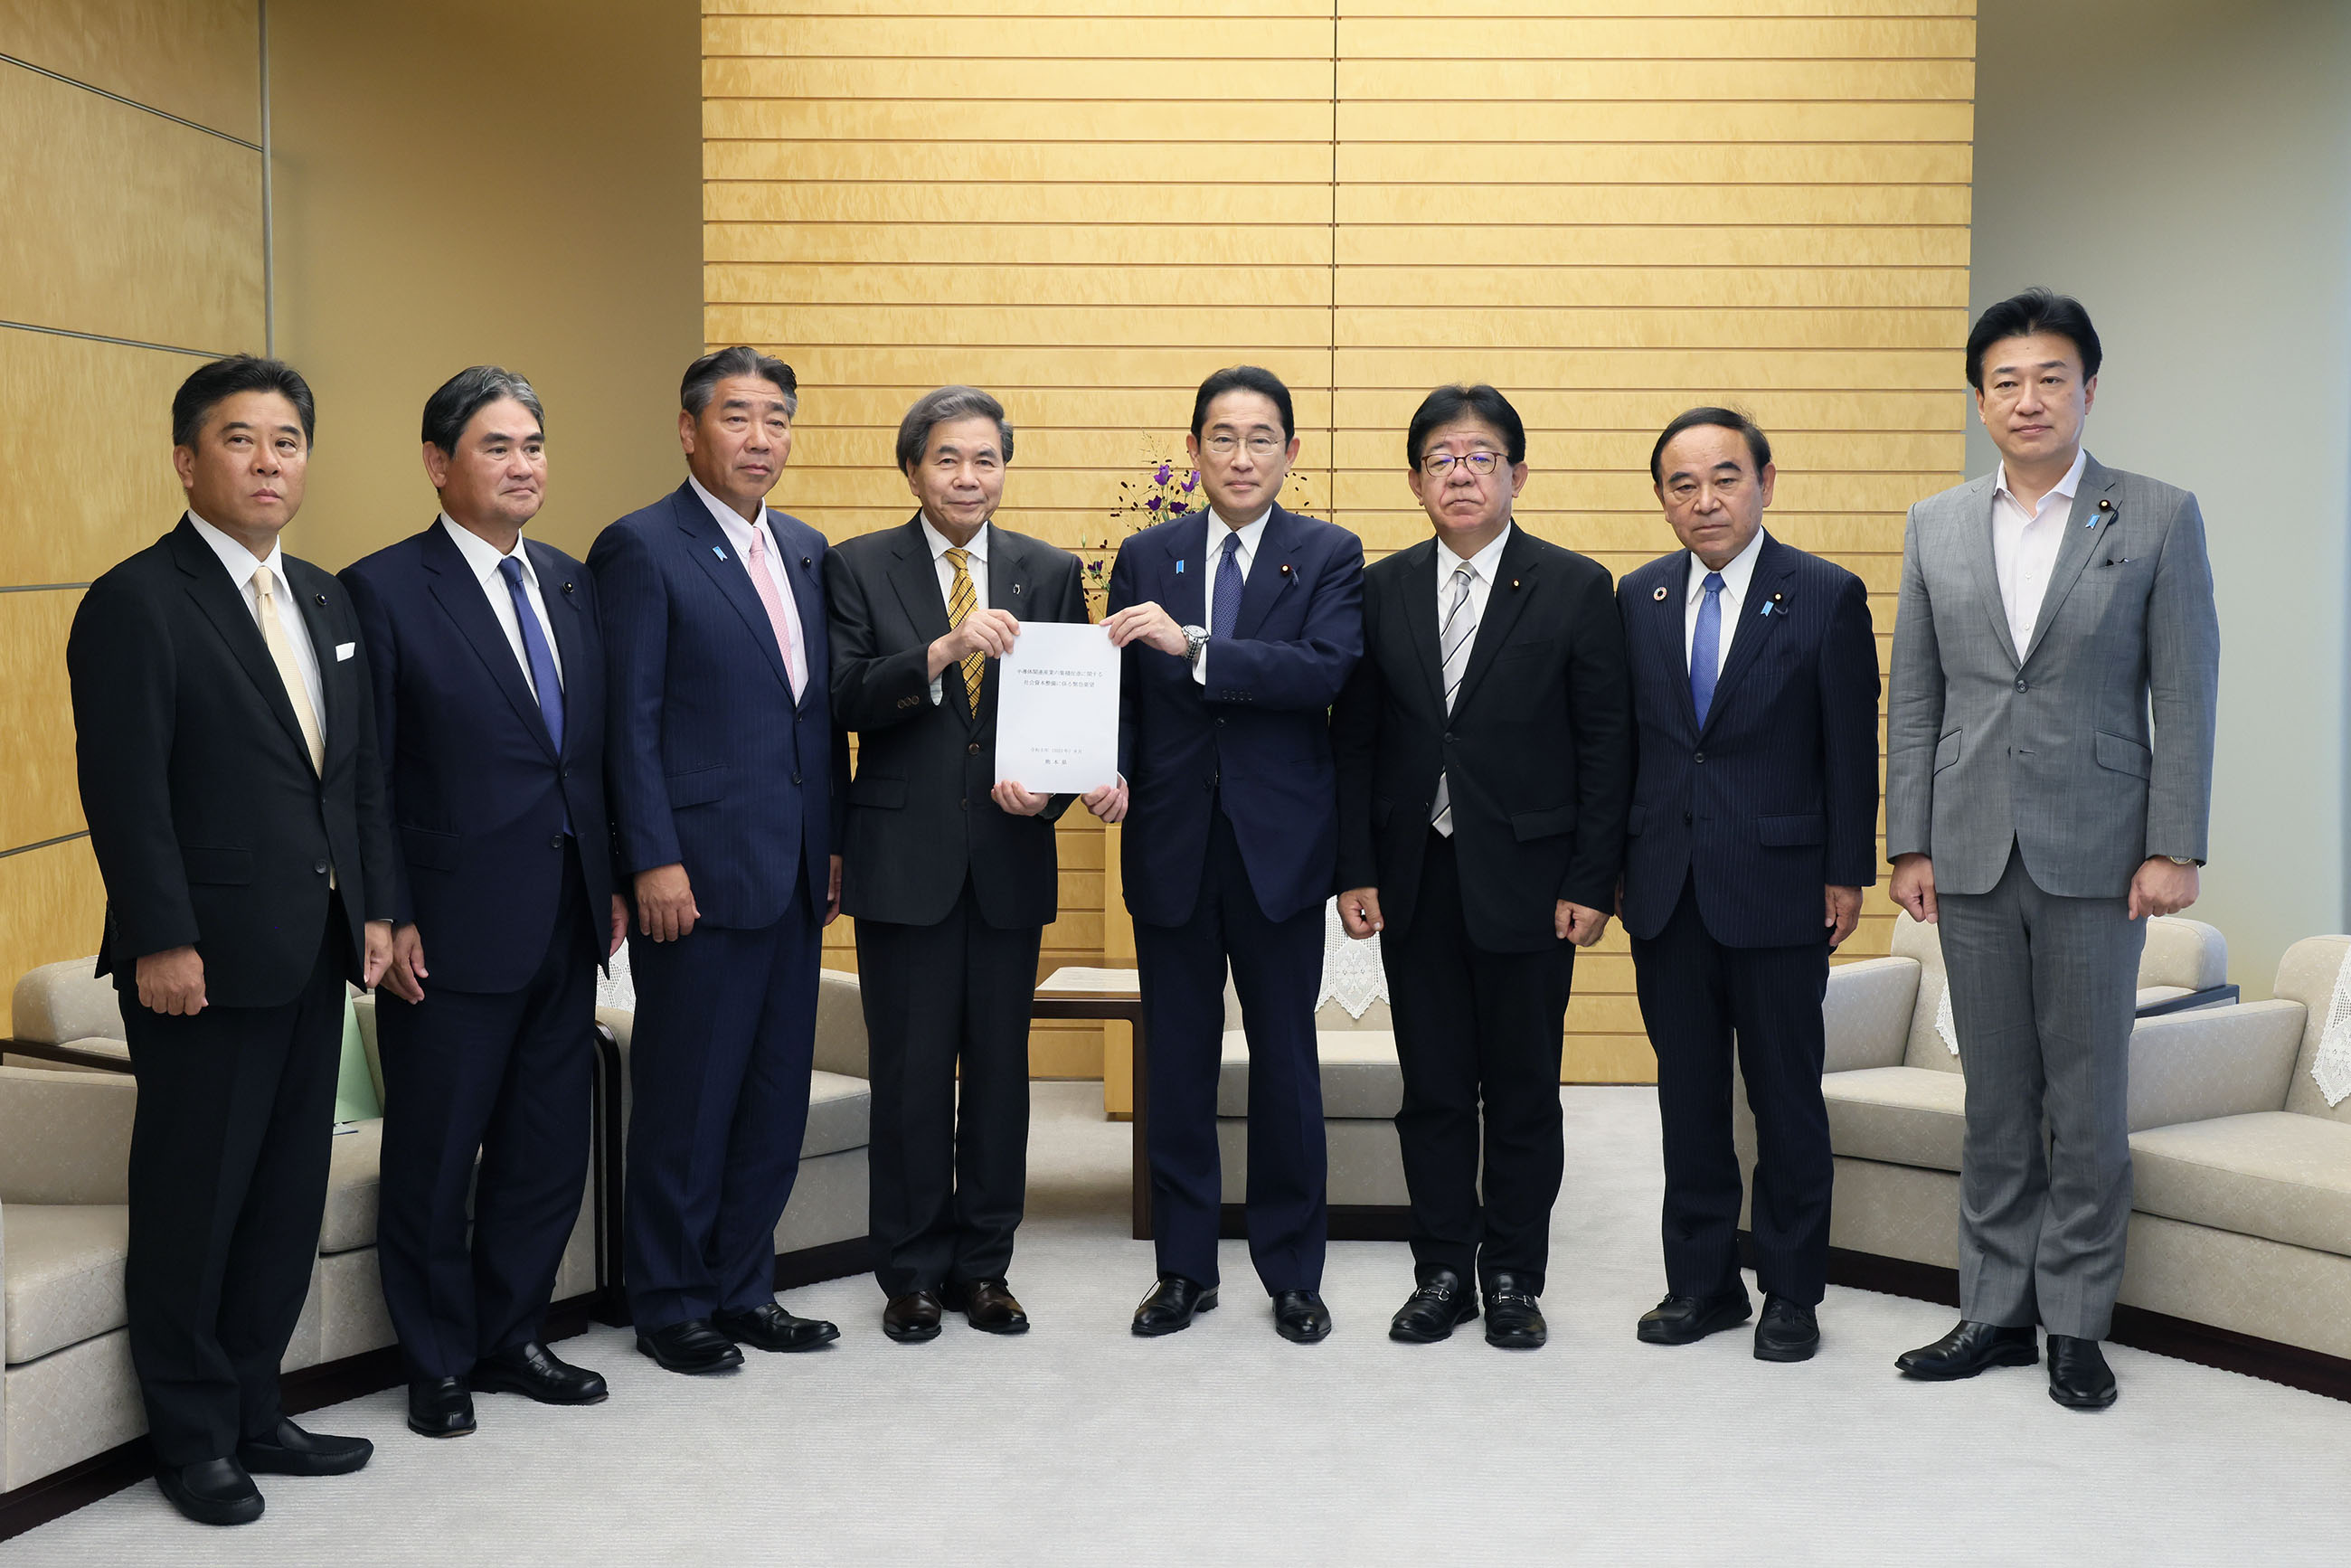 Meeting with the Chairperson of ITS Promotion and Roads Research Commission of the Liberal Democratic Party and the Governor of Kumamoto Prefecture